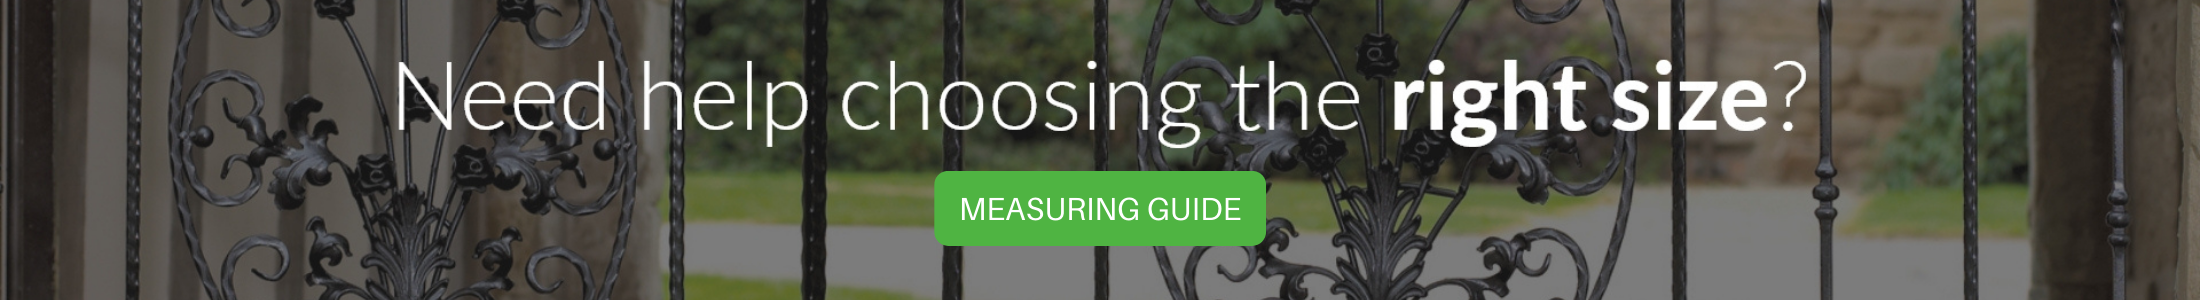 Go to the measuring guide if you are confused about ordering sizes